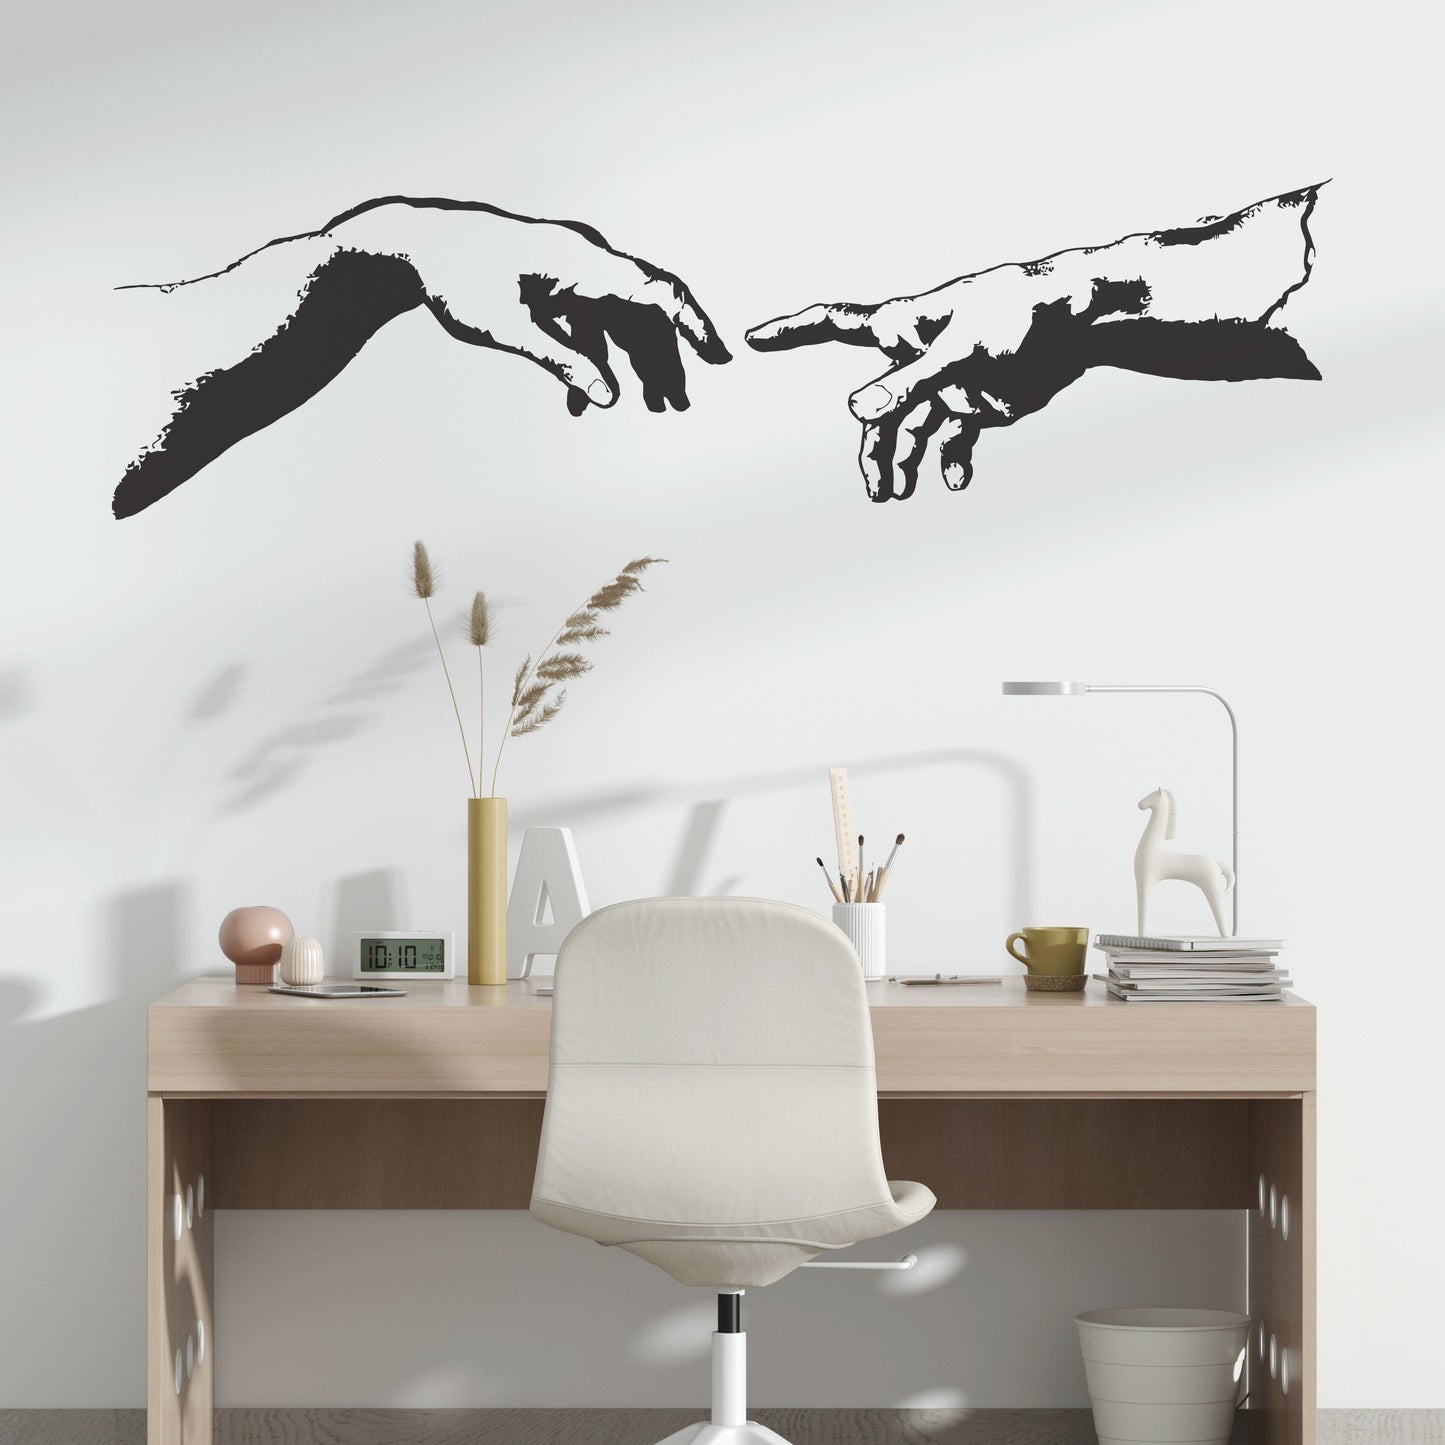 The Creation of Adam Vinyl Wall Decal Sticker. Michelangelo’s famous painting. Finger Touch. #682